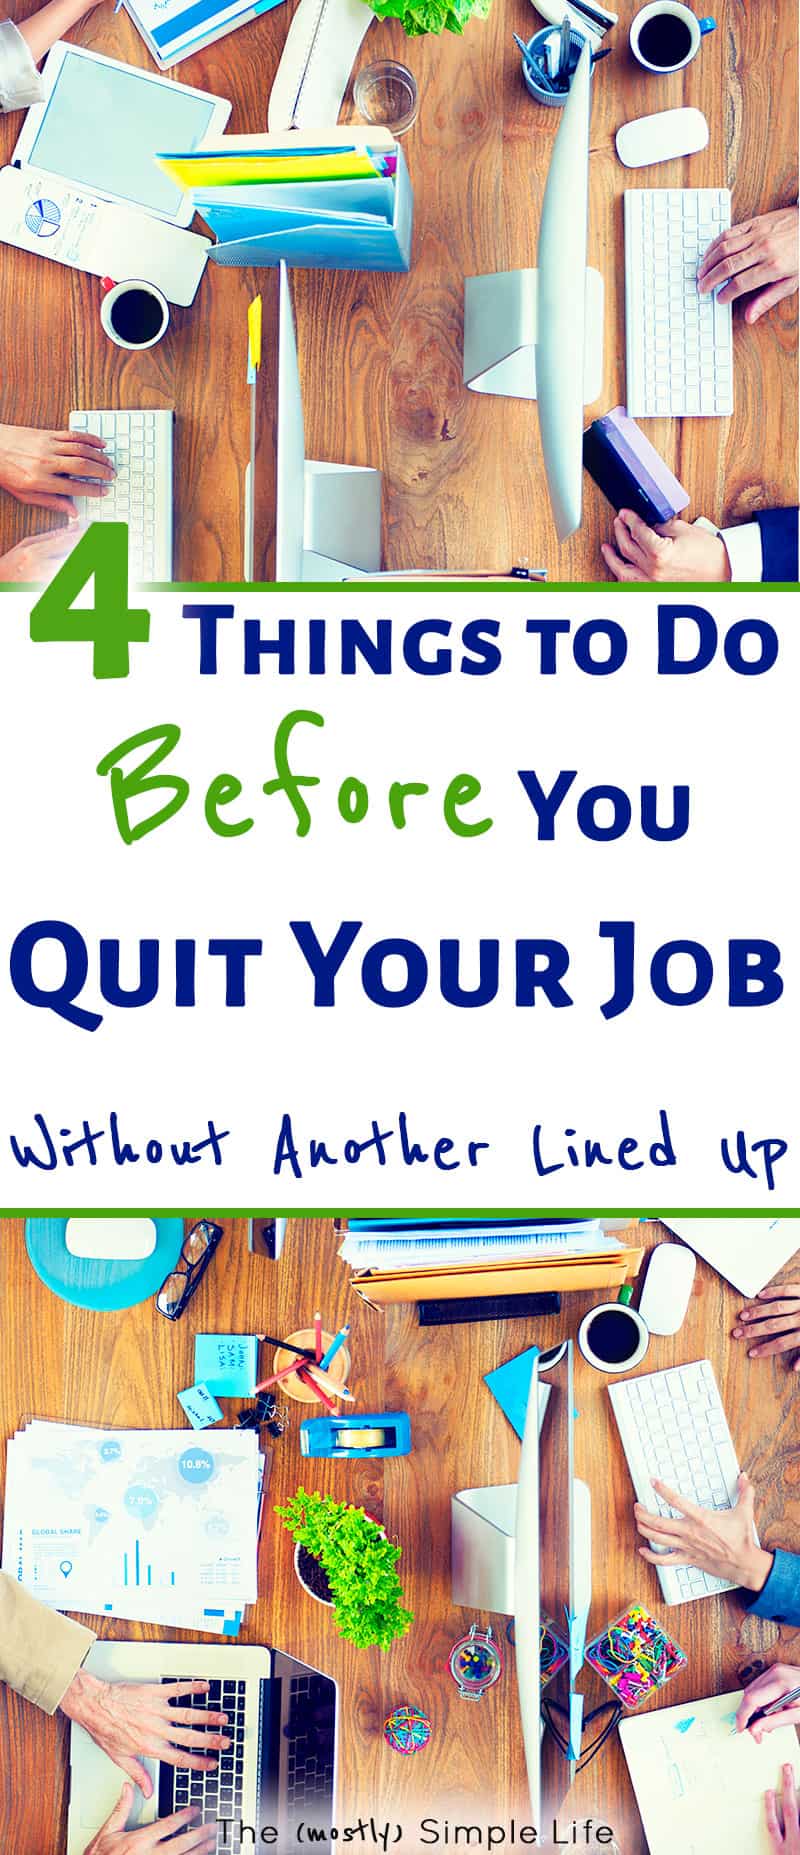 i want to quit my job without another job